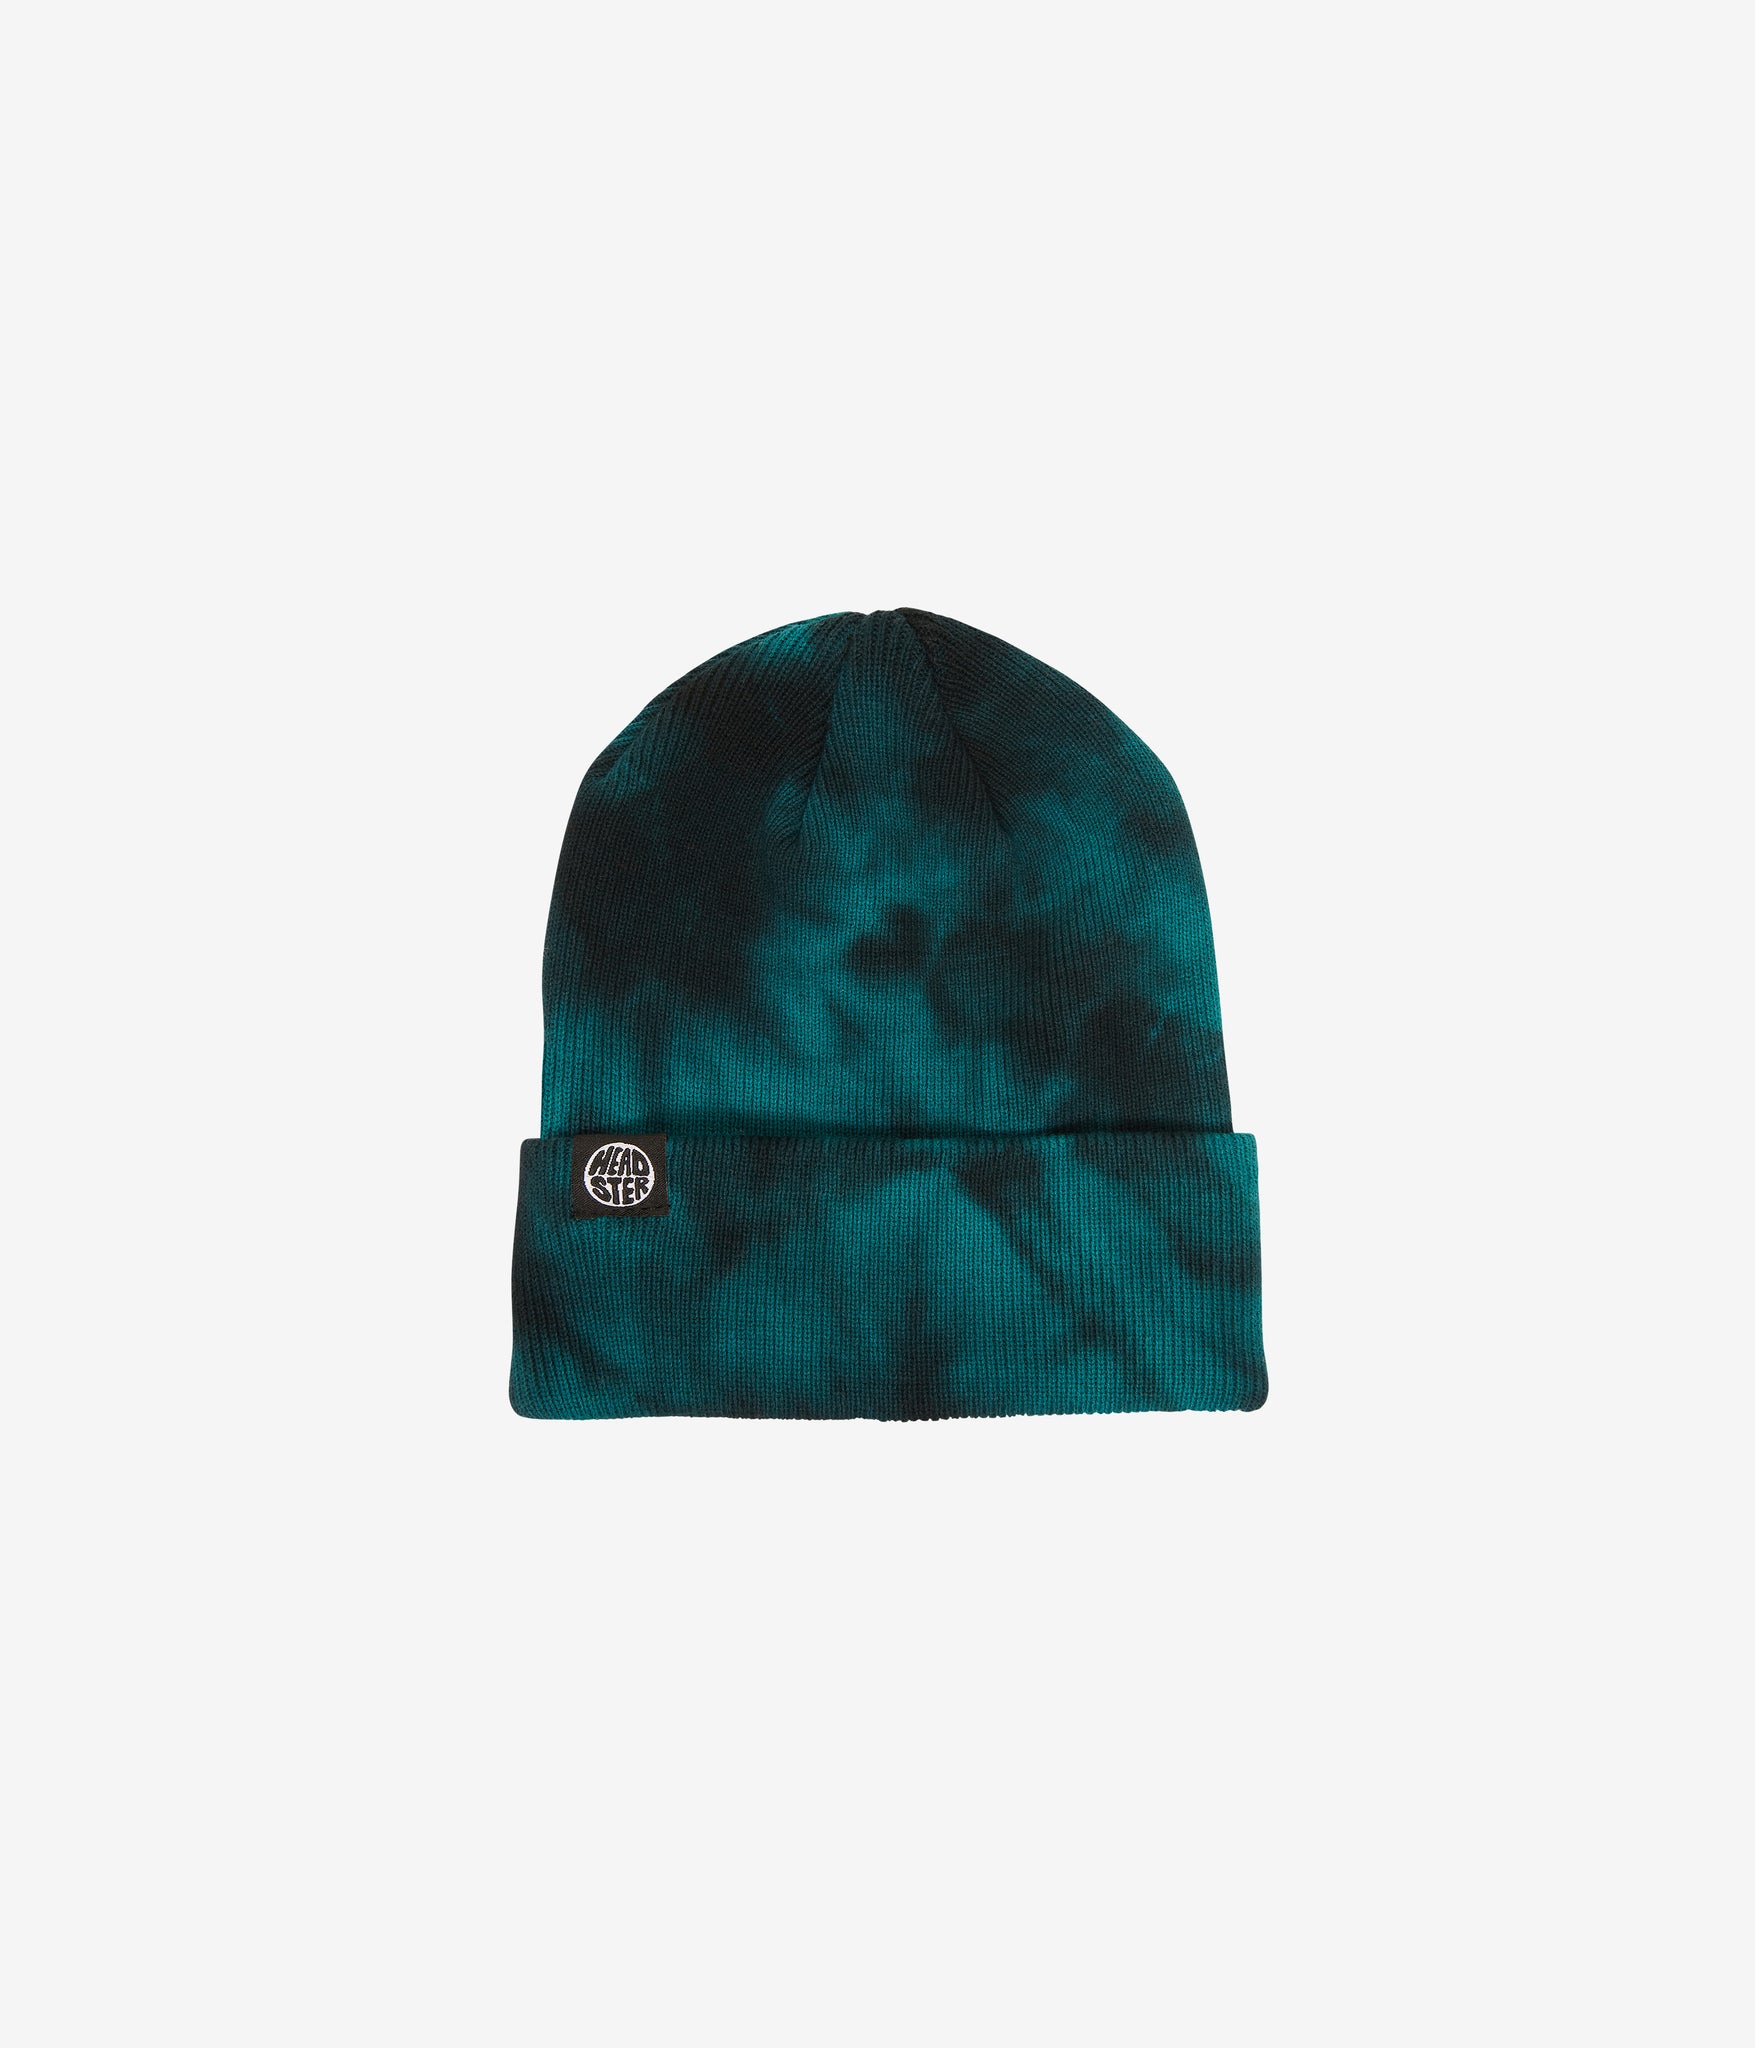 Tie Dye Beanie - Teal HEADSTER Kids for hats Steal Babies KIDS and 